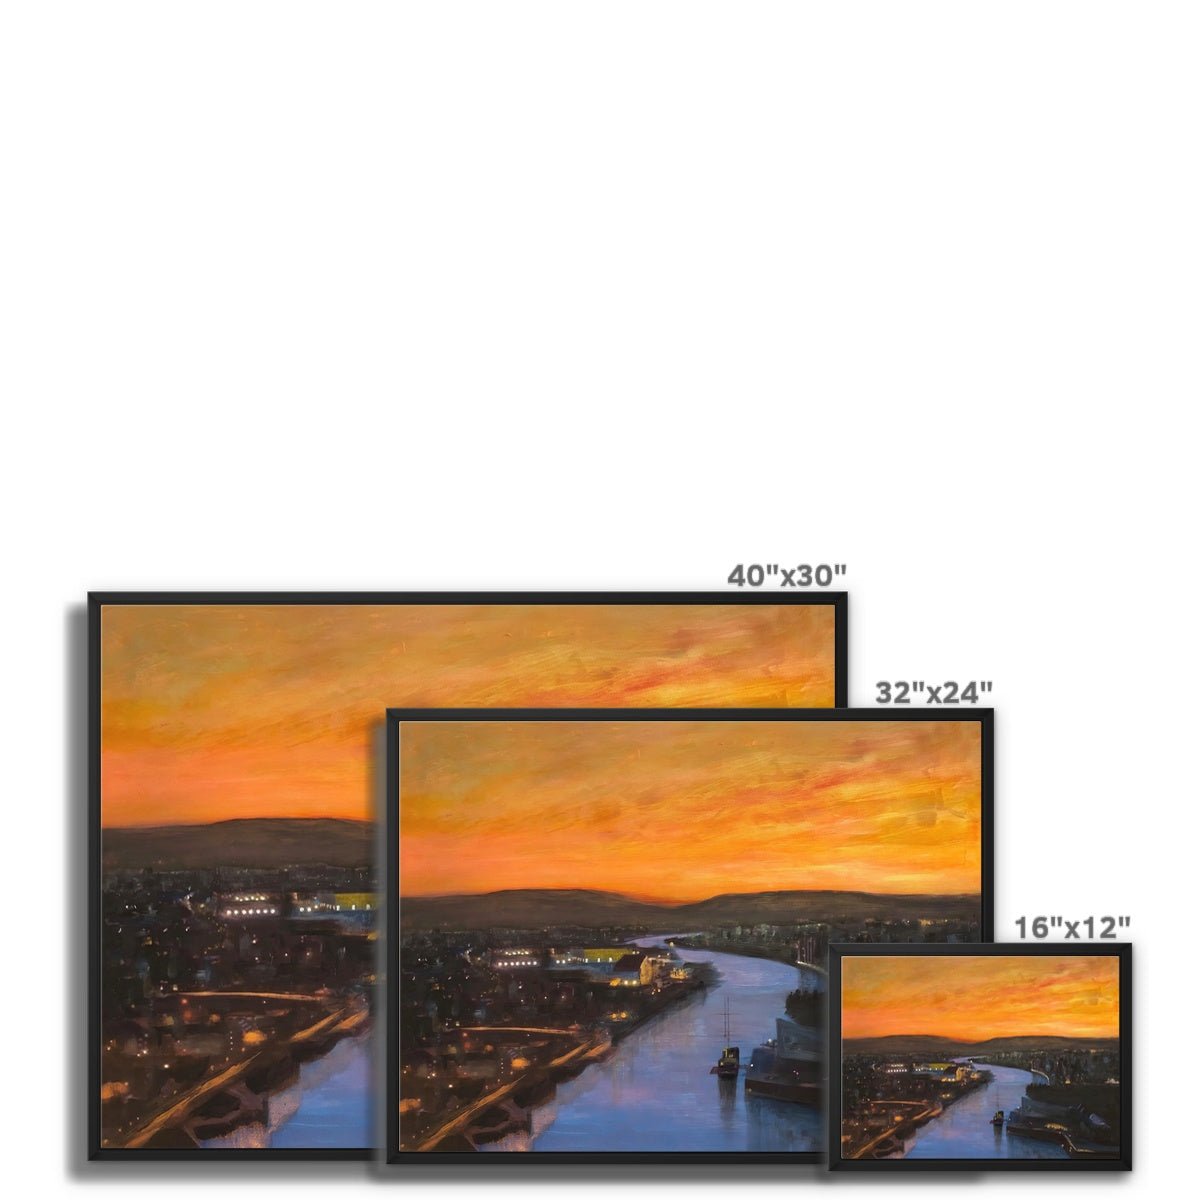 Glasgow Harbour Looking West Painting | Framed Canvas From Scotland-Floating Framed Canvas Prints-Edinburgh & Glasgow Art Gallery-Paintings, Prints, Homeware, Art Gifts From Scotland By Scottish Artist Kevin Hunter